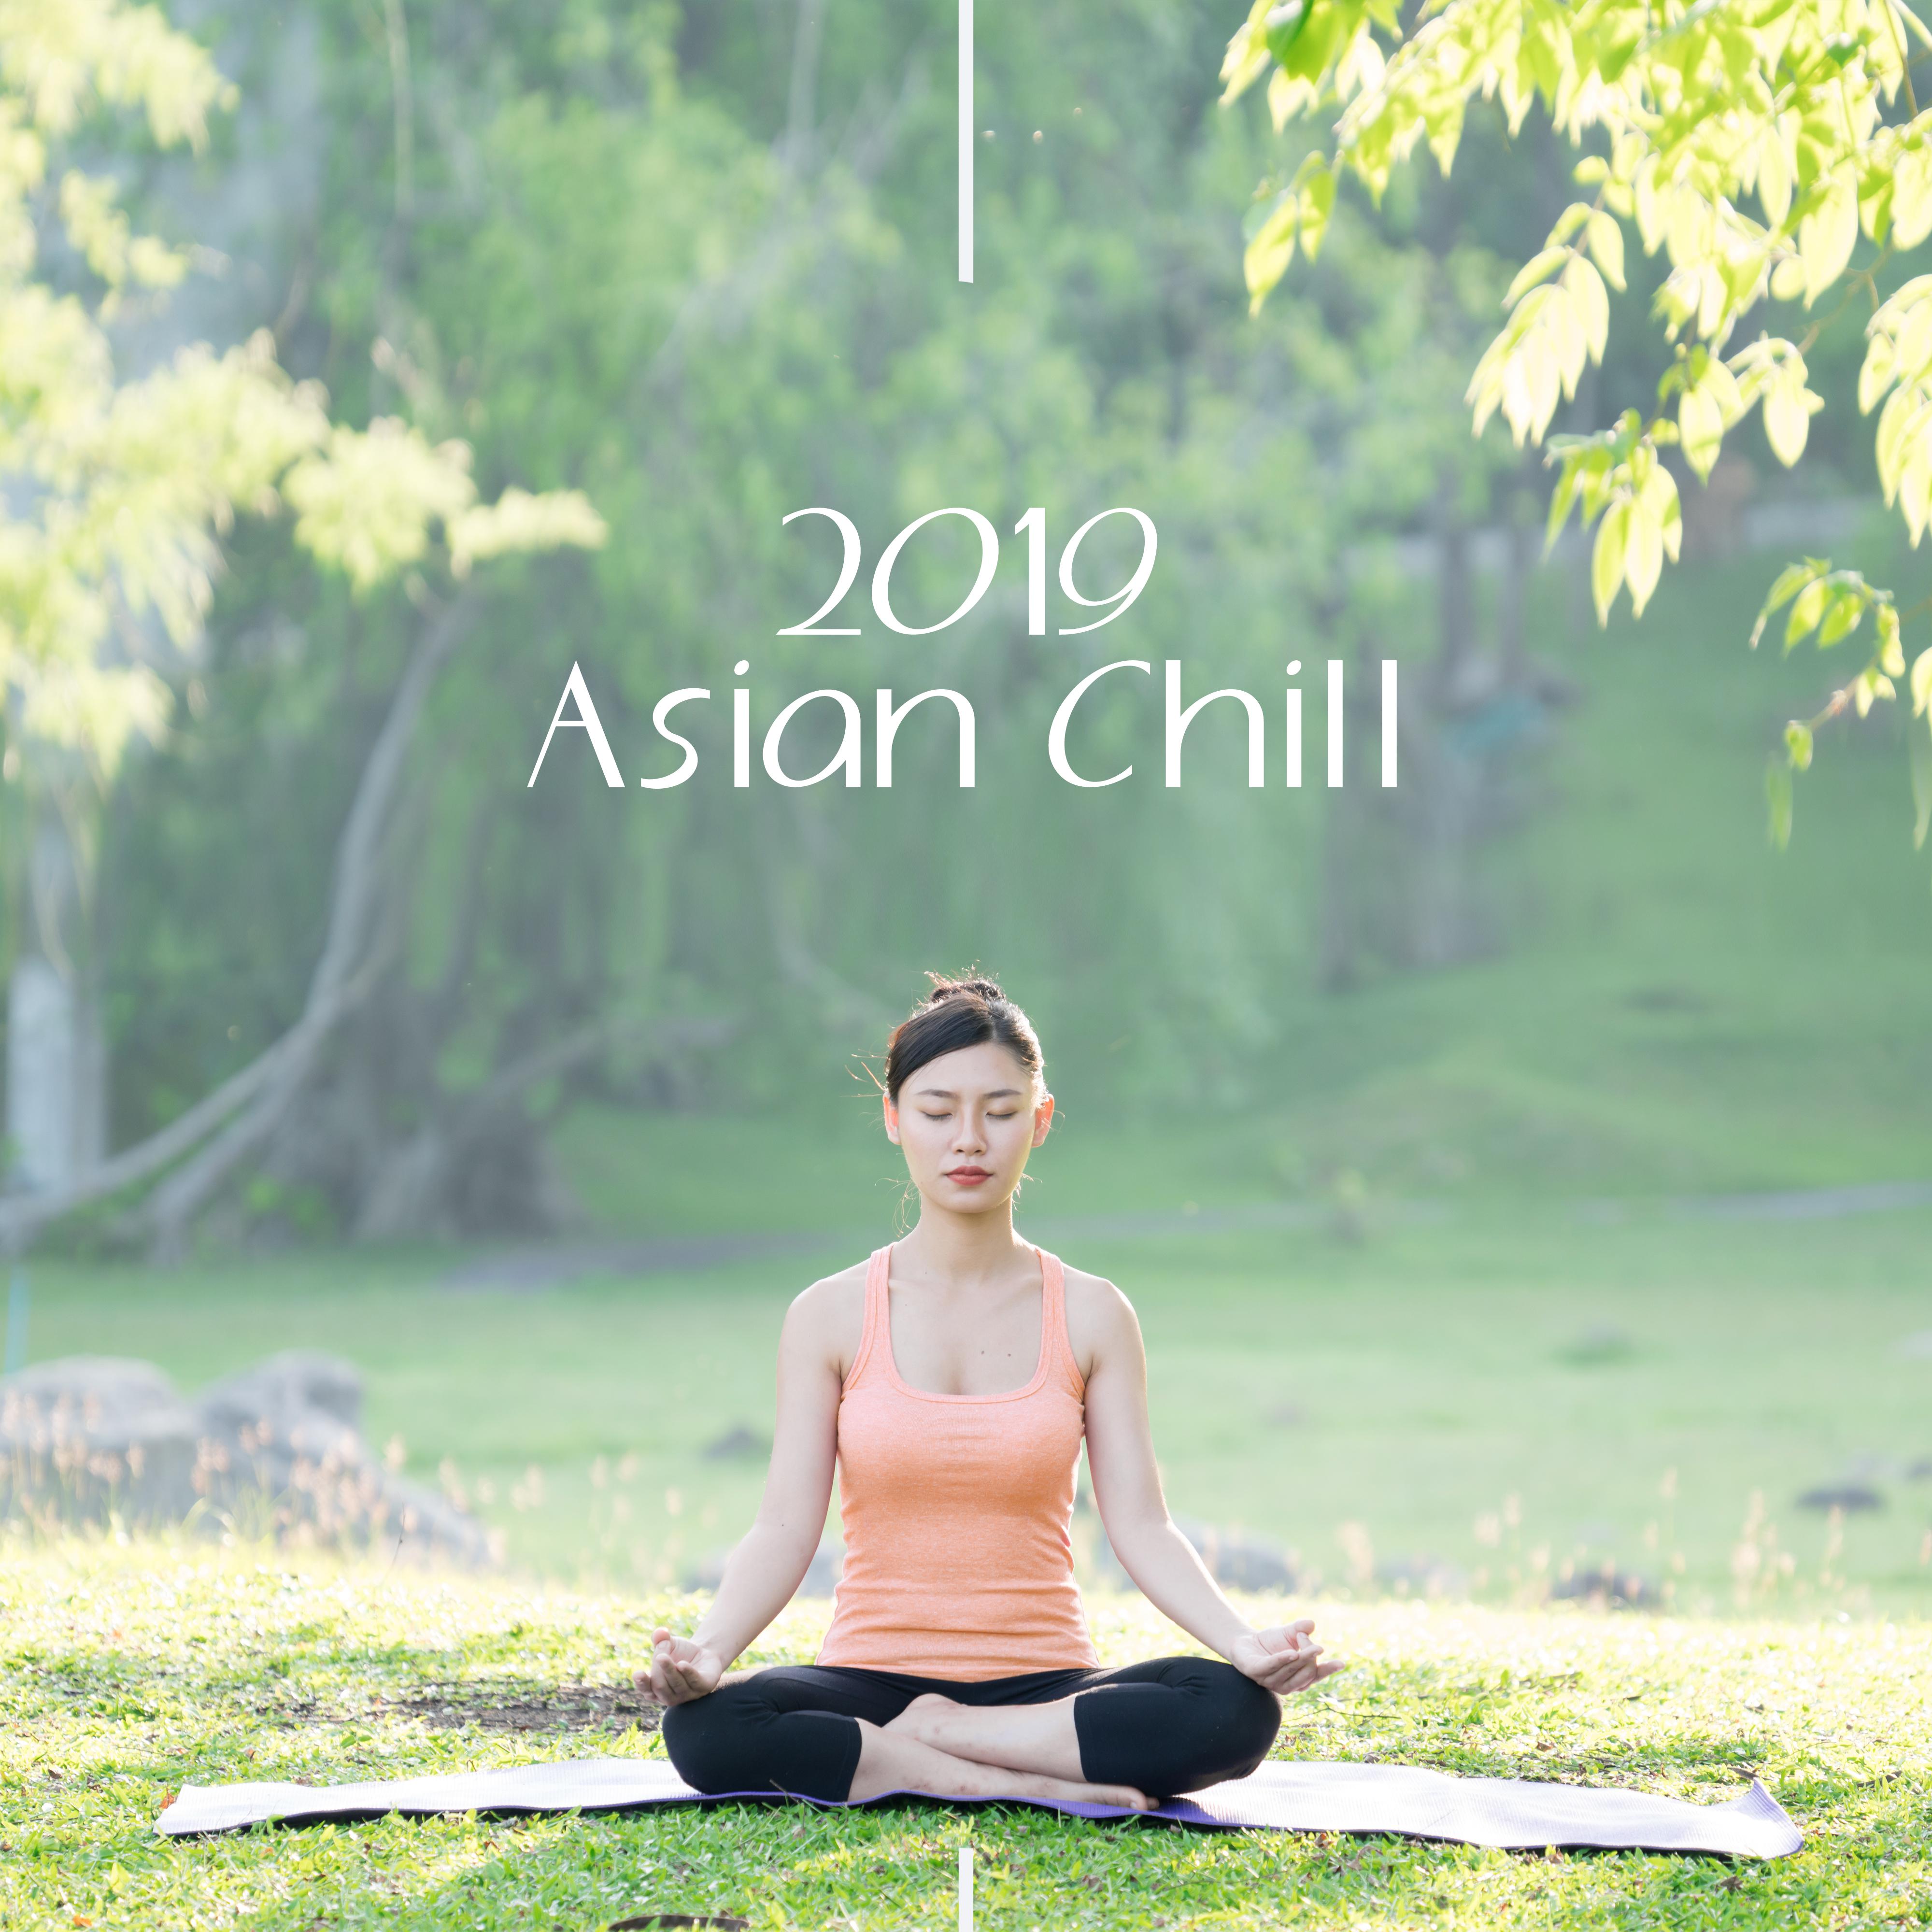 2019 Asian Chill  Smooth Music for Relaxation, Yoga, Deep Meditation, Yoga Chill, Asian Relaxation, Calming Vibes to Rest